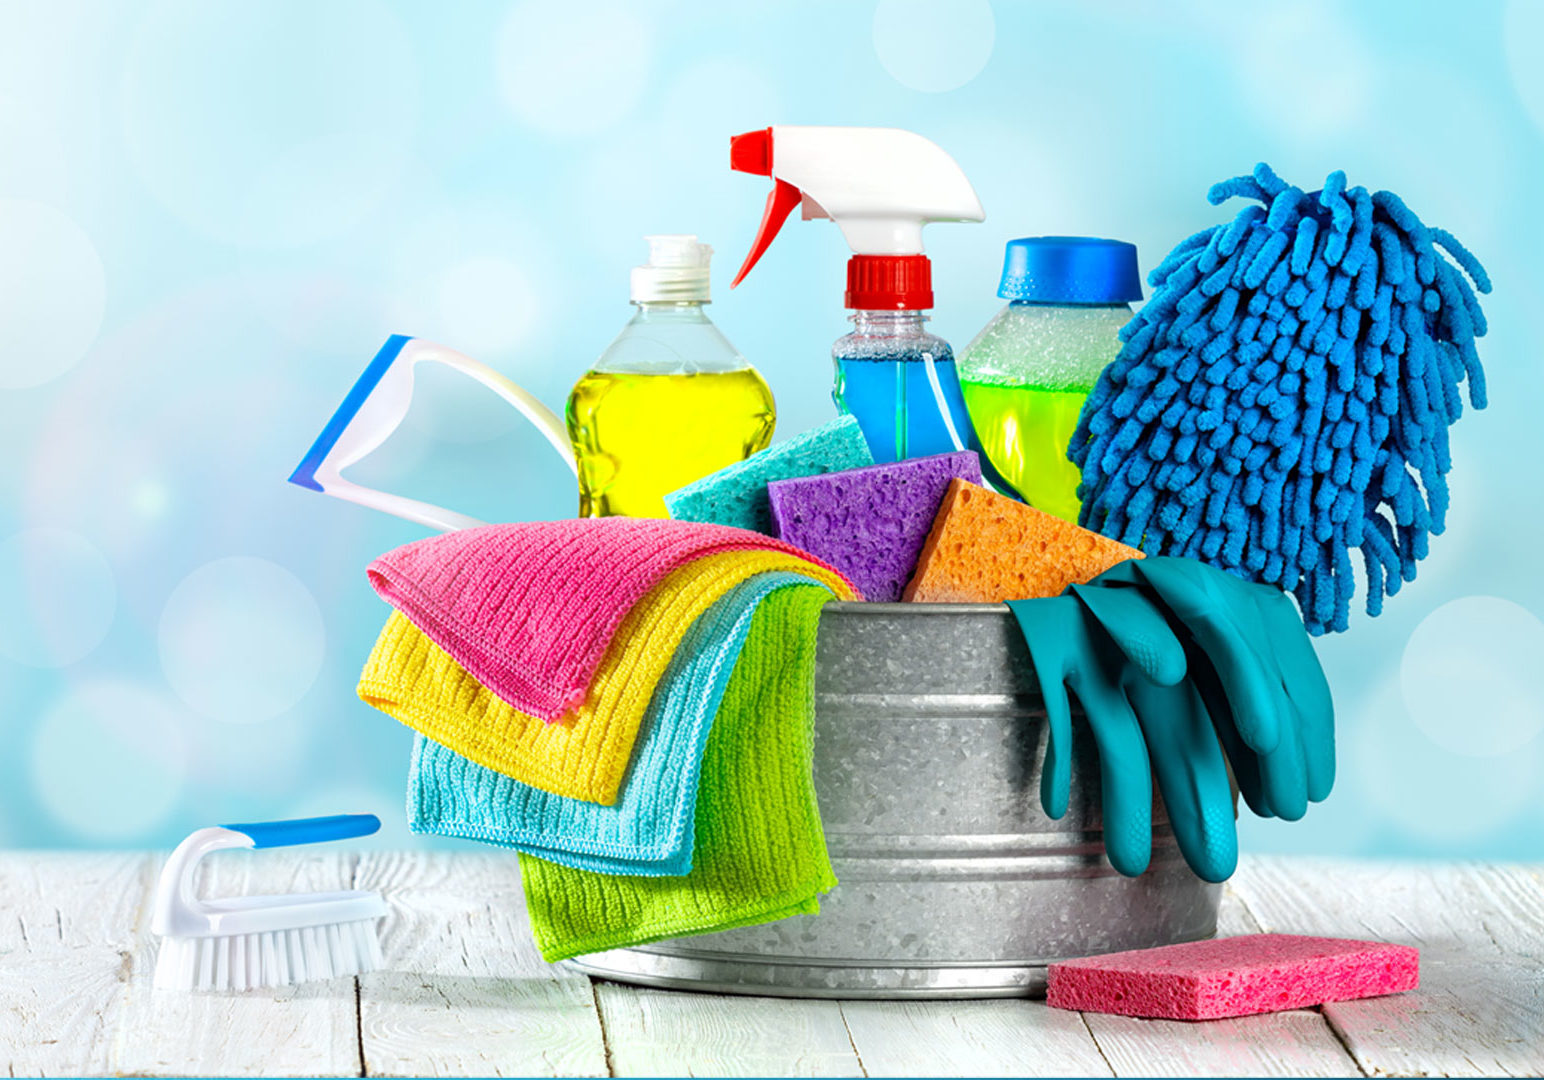 use of cleaning chemicals in home care settings